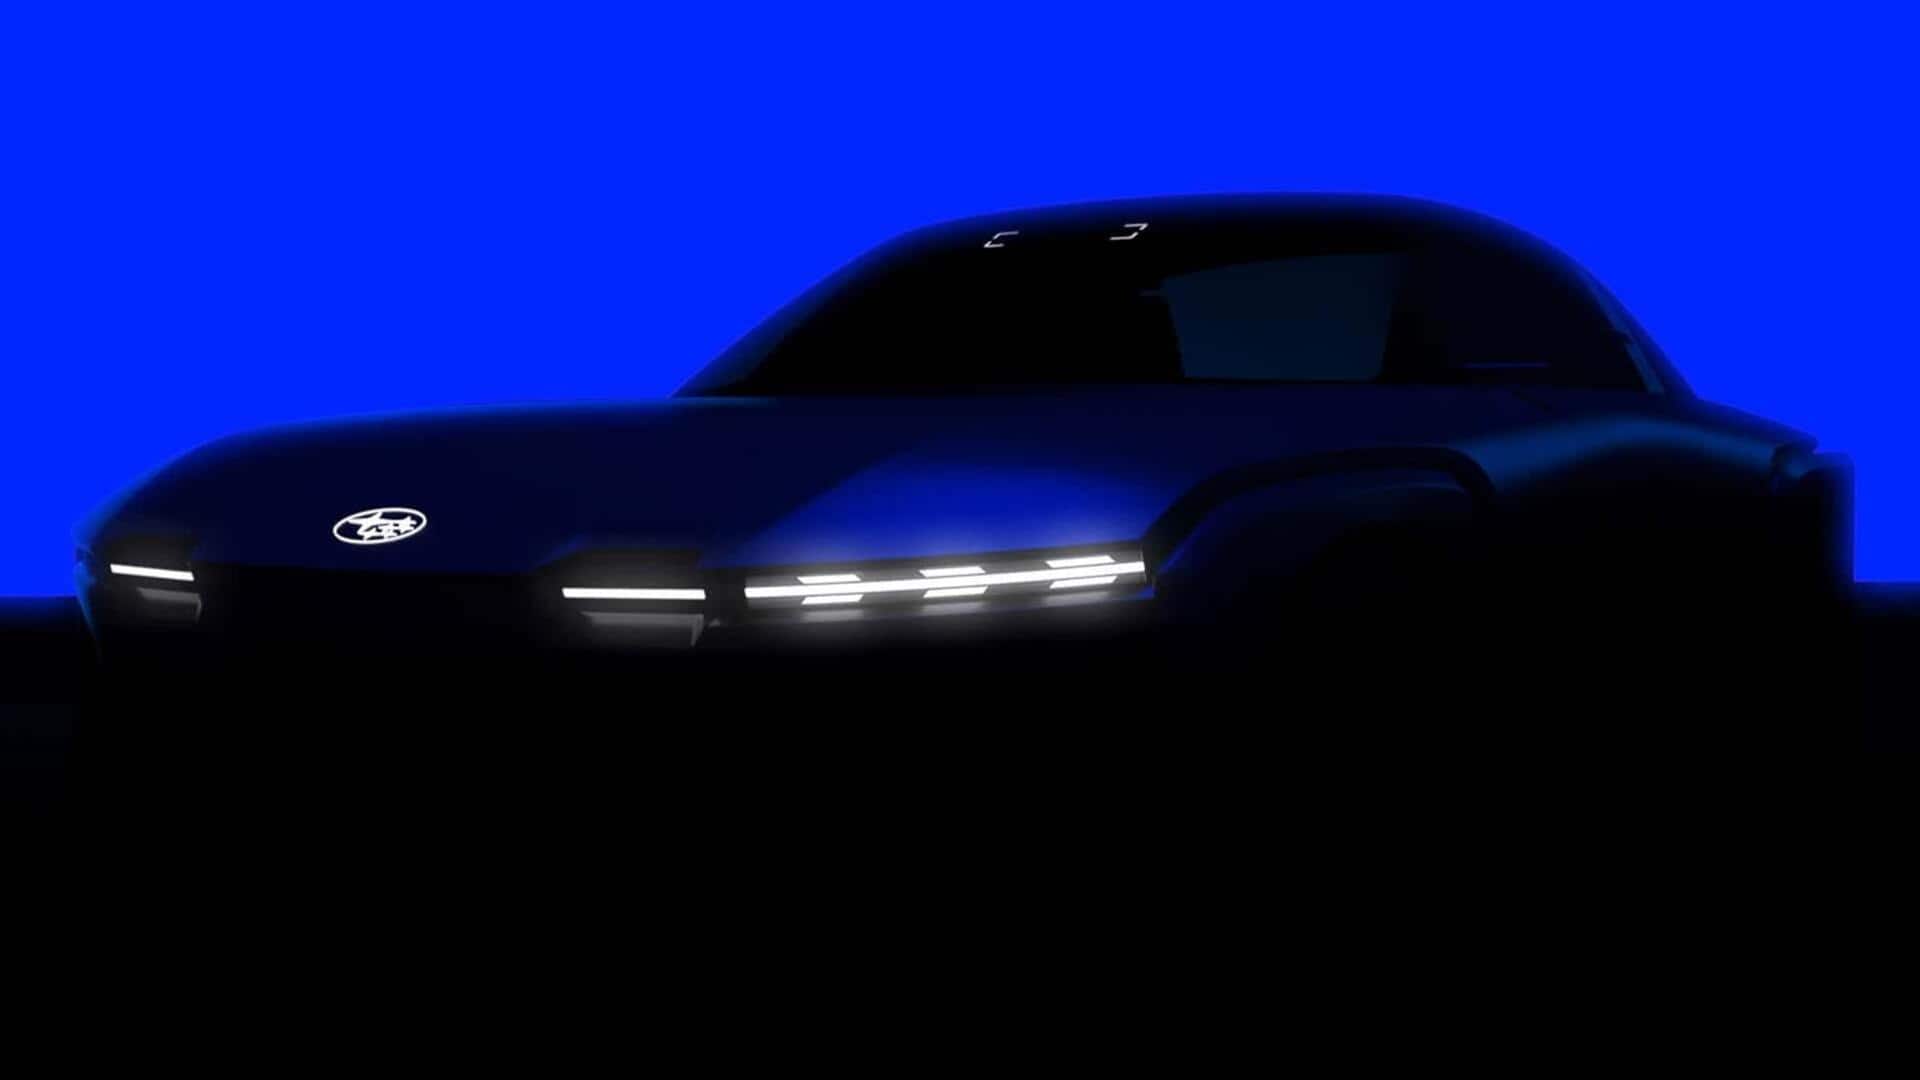 Subaru teases two-door coupe with futuristic styling, side cameras